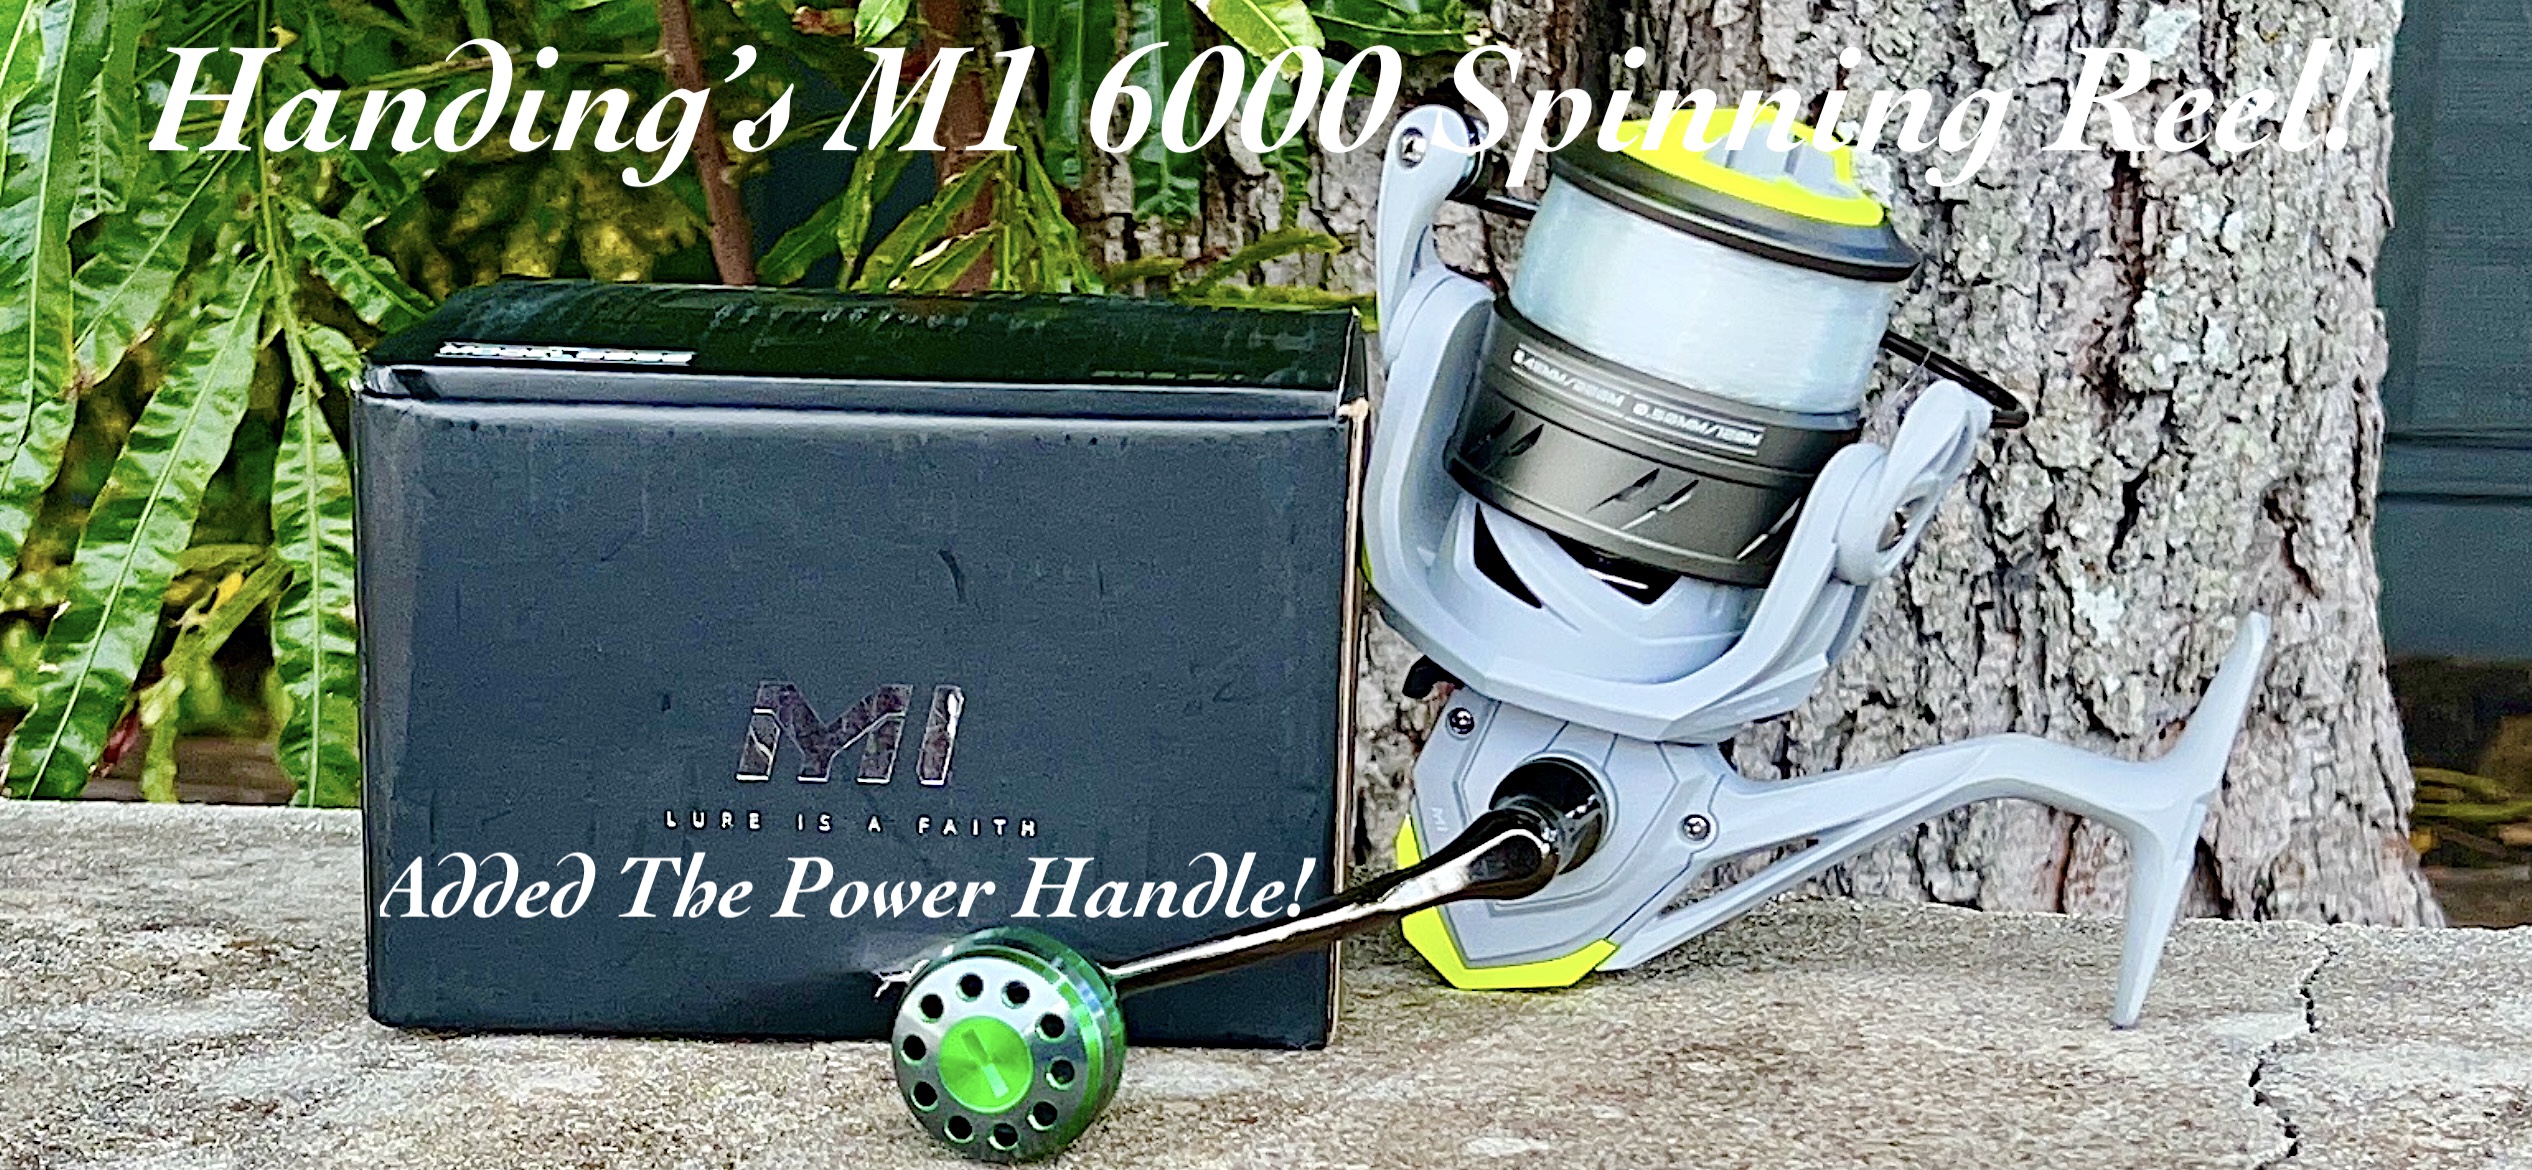 Most Powerful HANDING M1 Spinning Reel! Added a Goture Handle